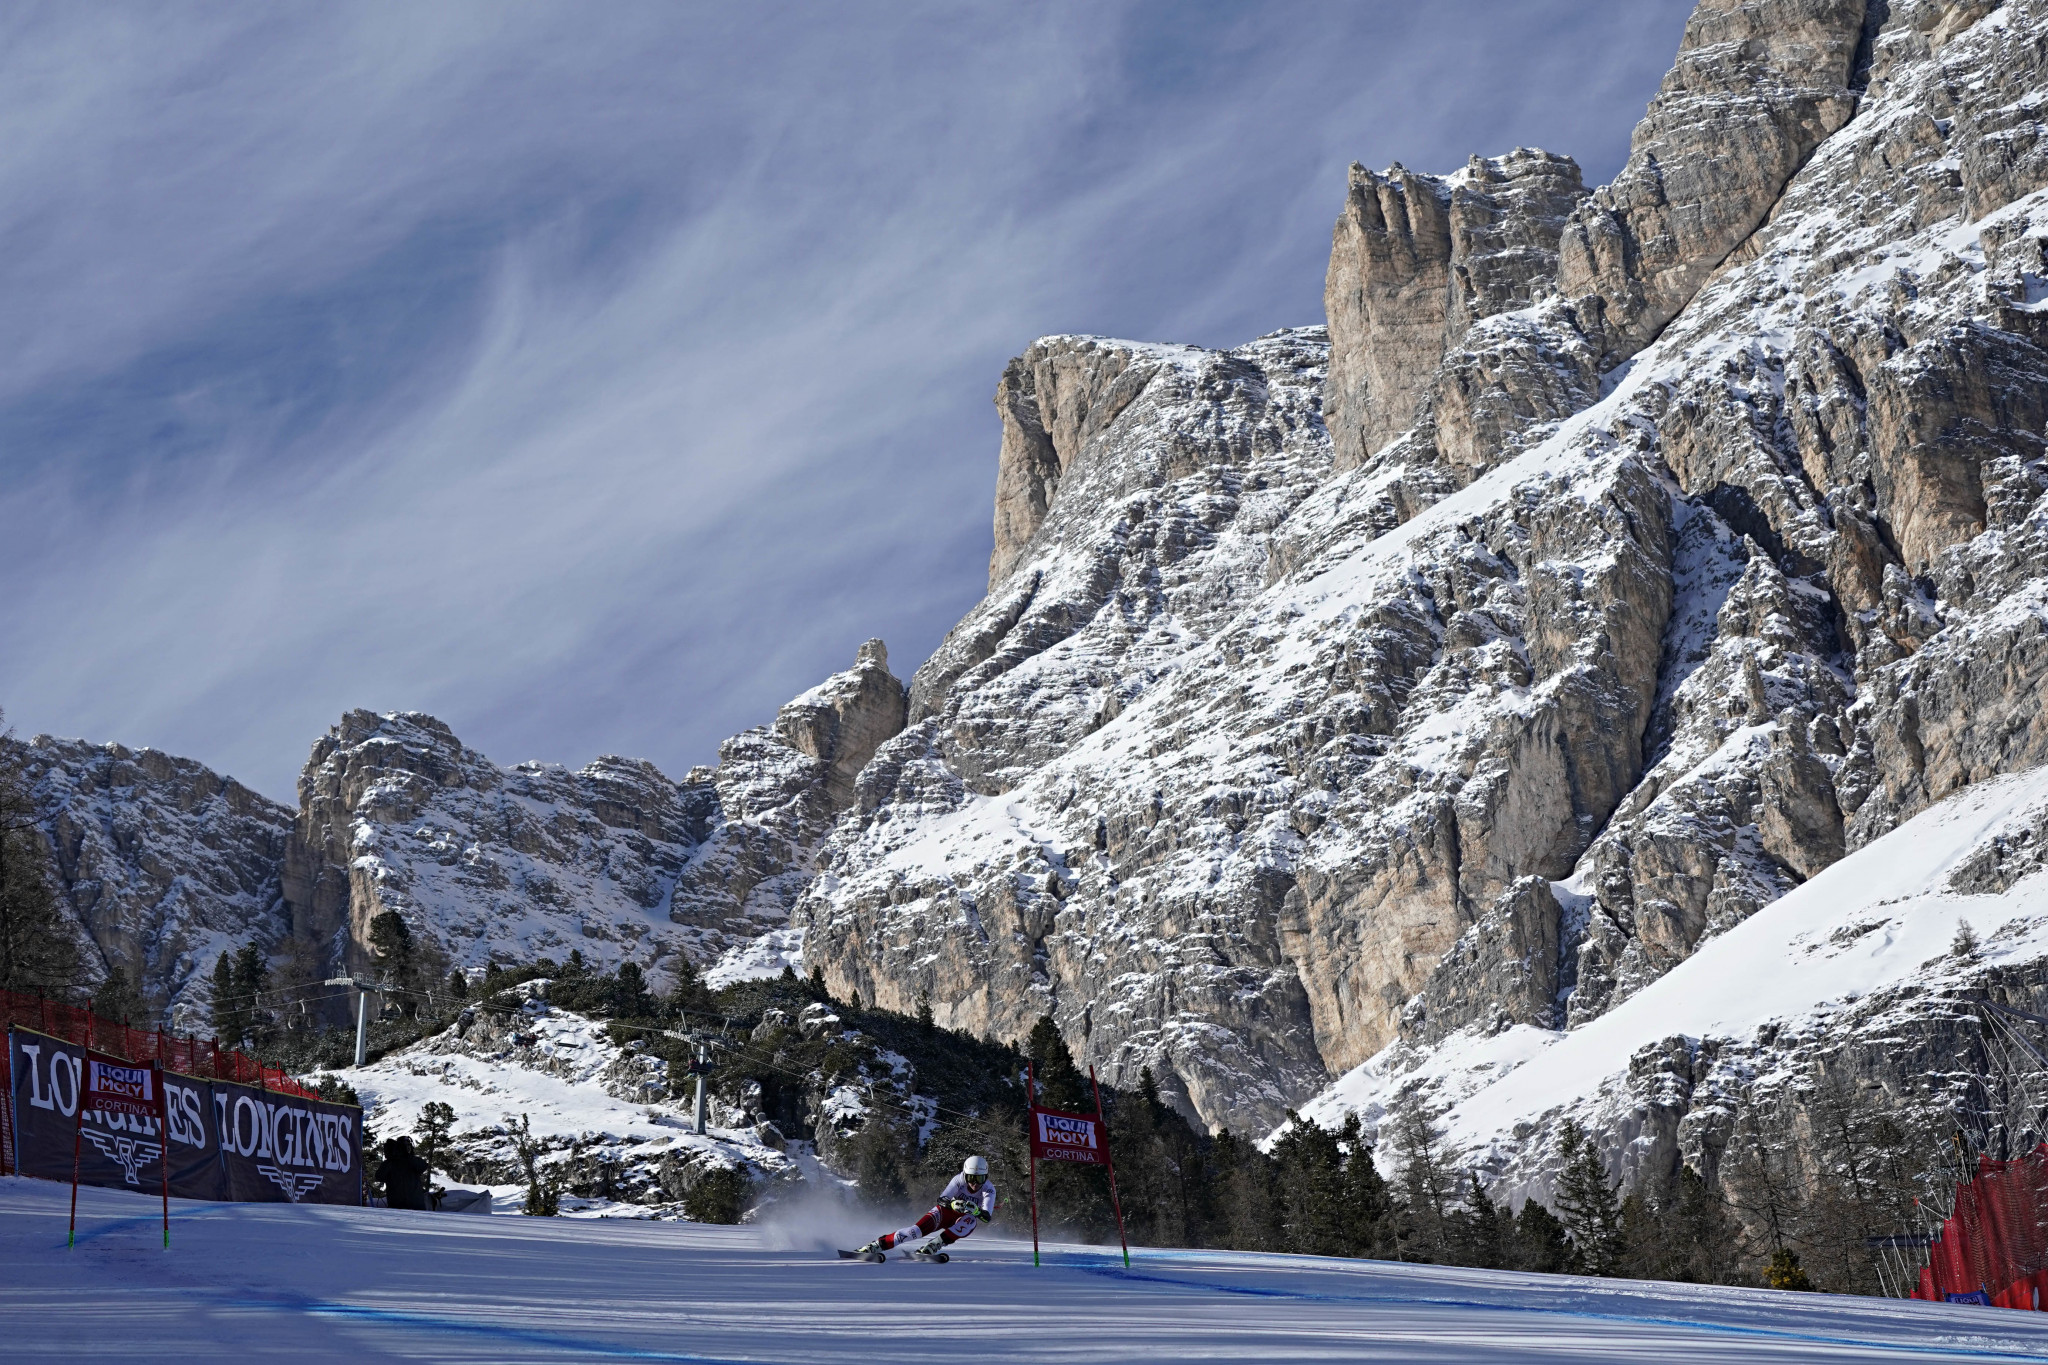 Cortina d’Ampezzo will host the next edition of the FIS Alpine World Ski Championships in two years' time ©Getty Images